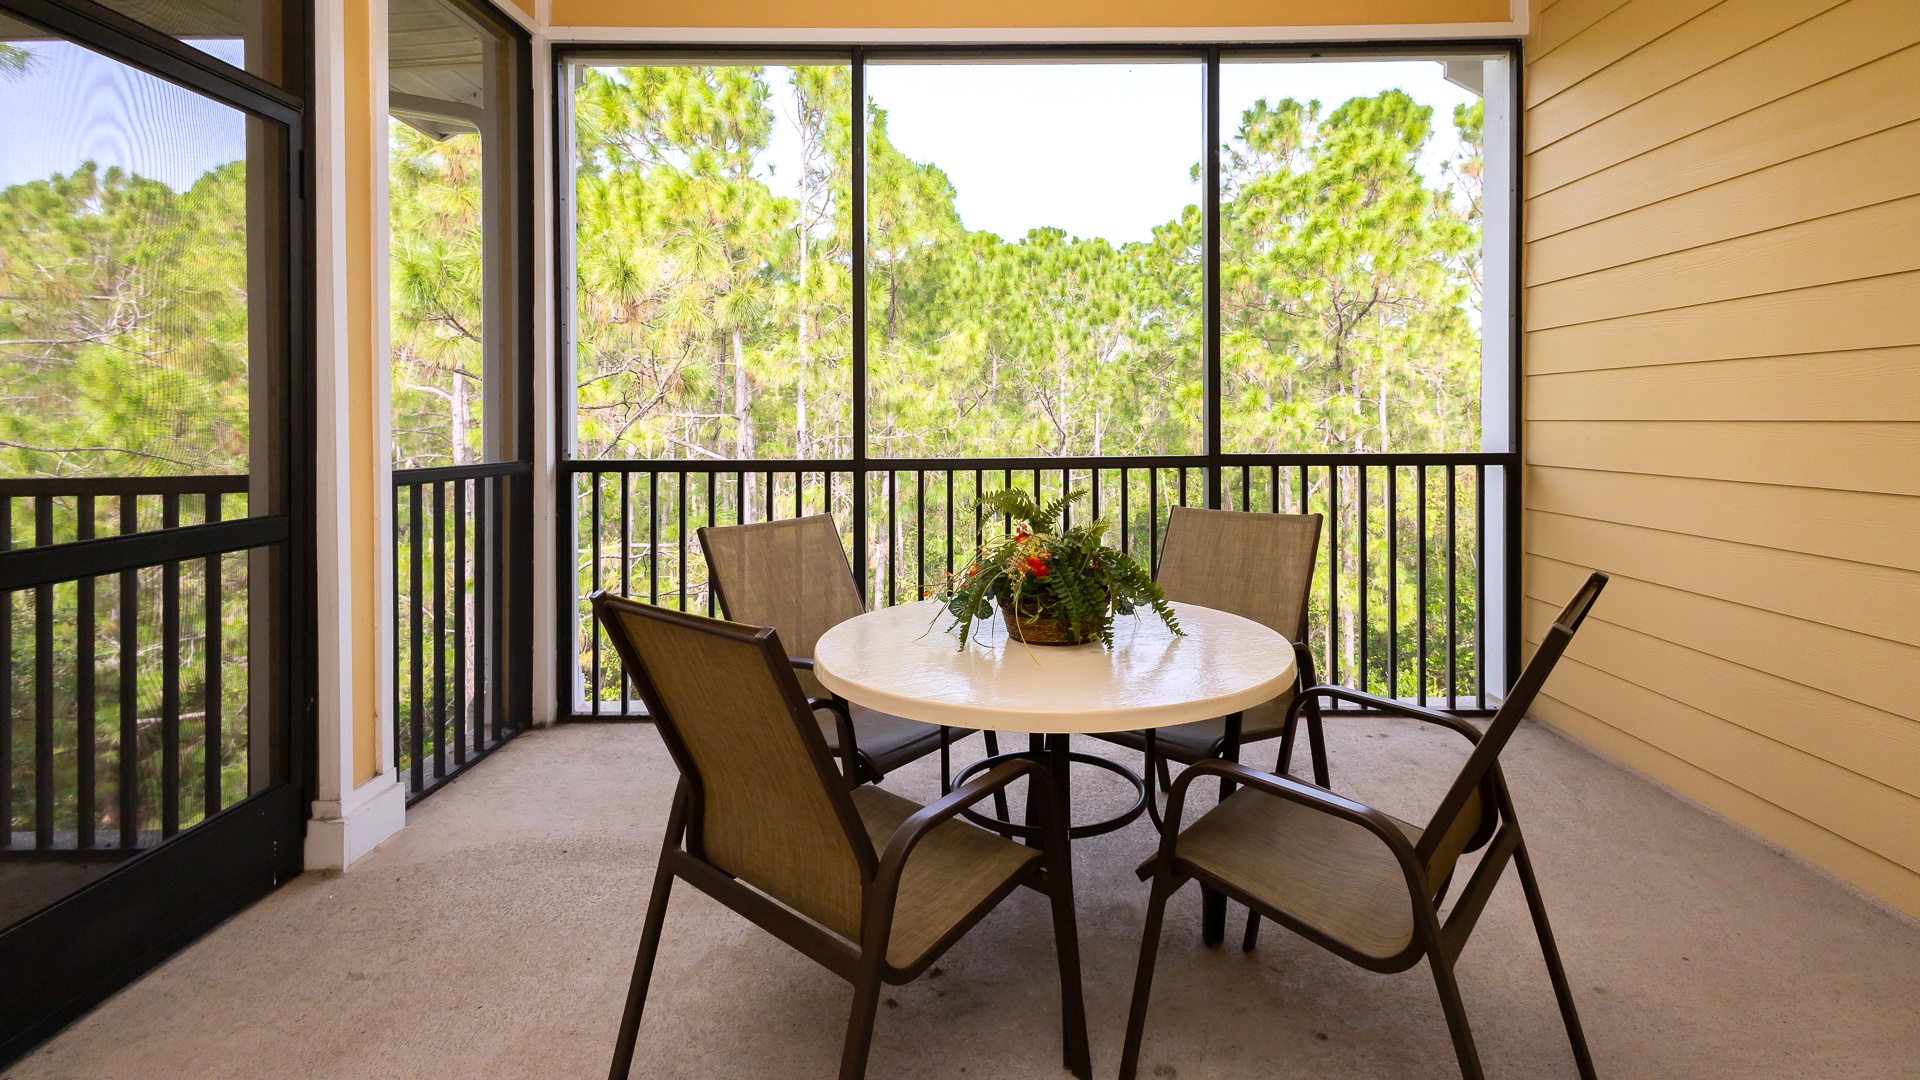 Dine alfresco on the screened-in balcony, offering space for 4